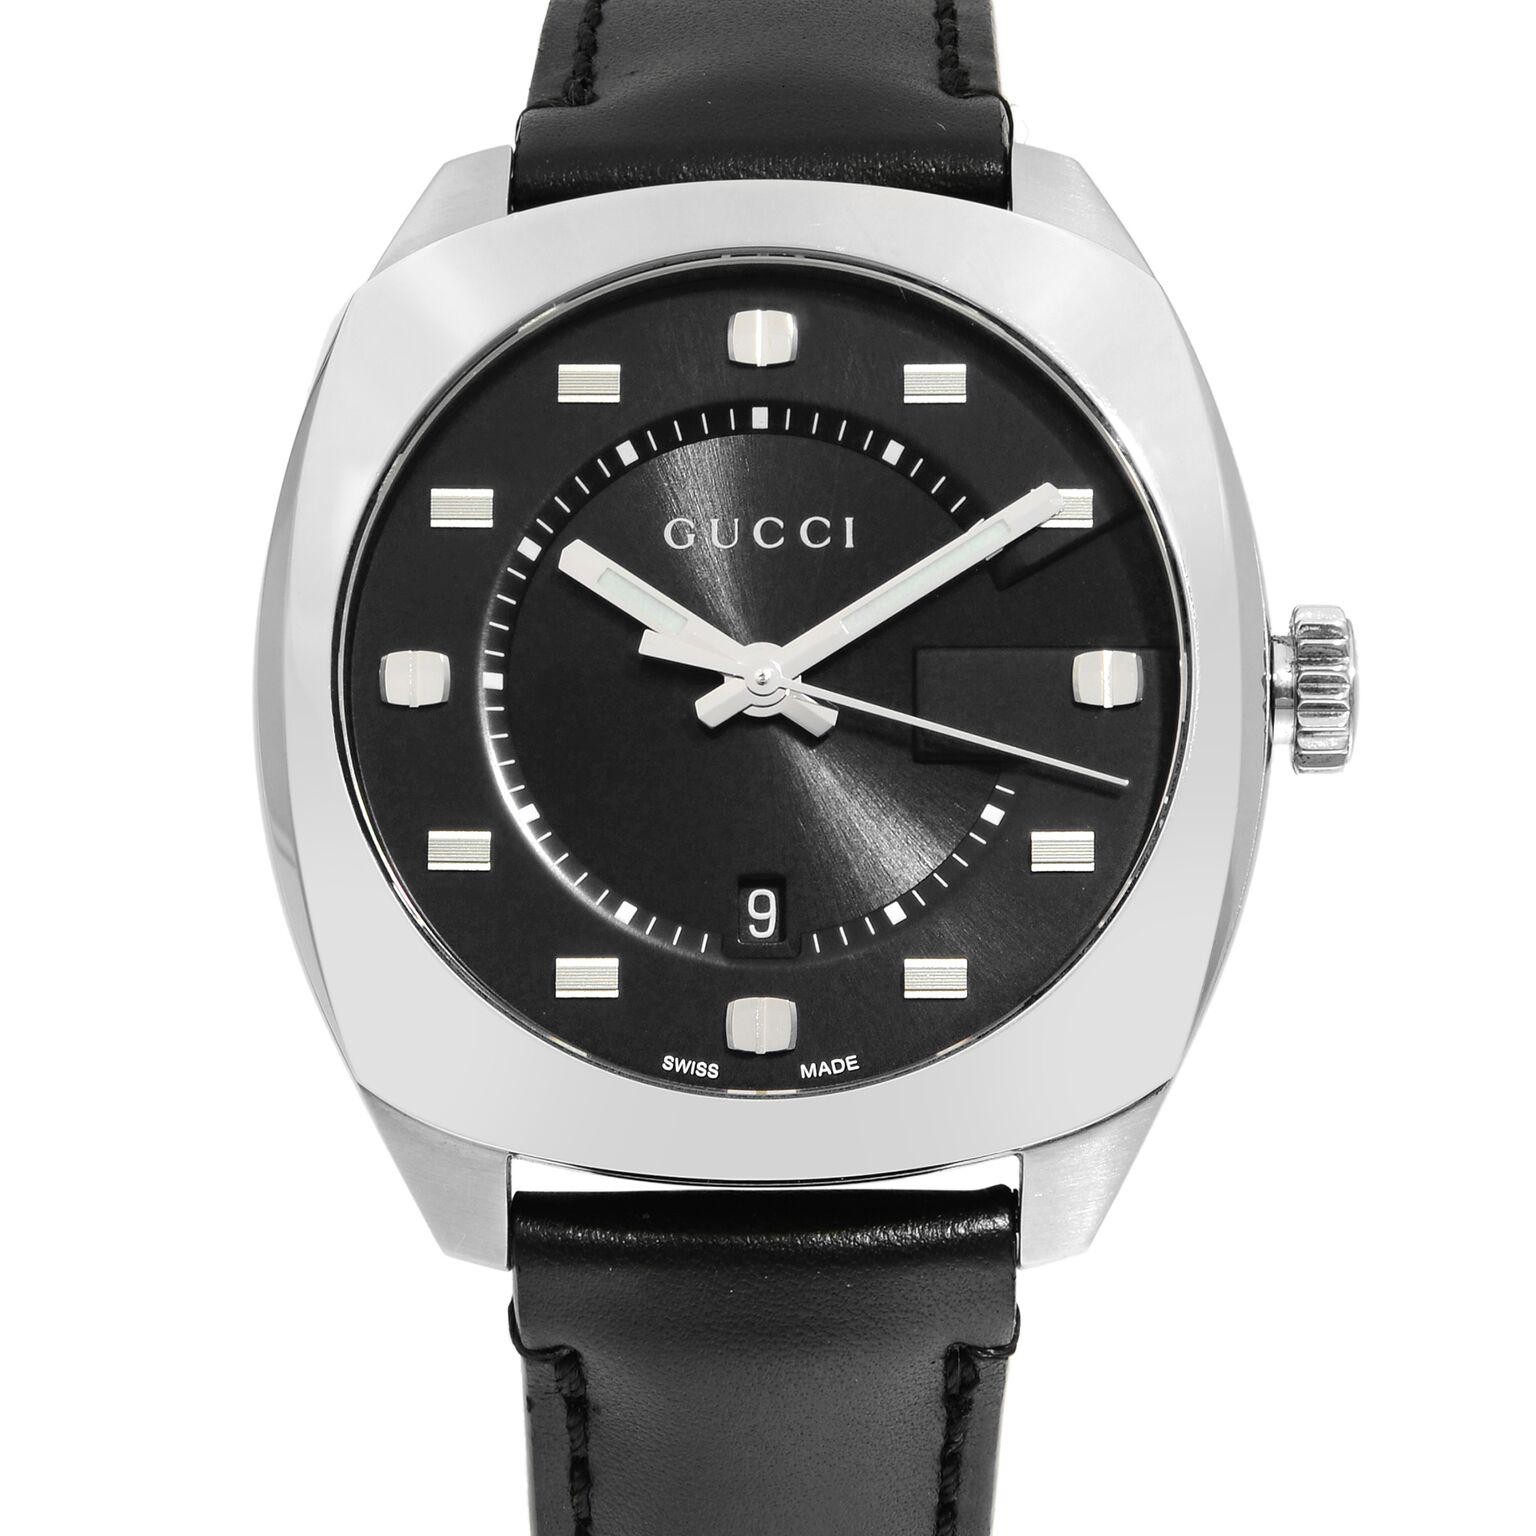 This display model Gucci GG2570 YA142307 is a beautiful men's timepiece that is powered by quartz (battery) movement which is cased in a stainless steel case. It has a round shape face, date indicator dial and has hand sticks & dots style markers.